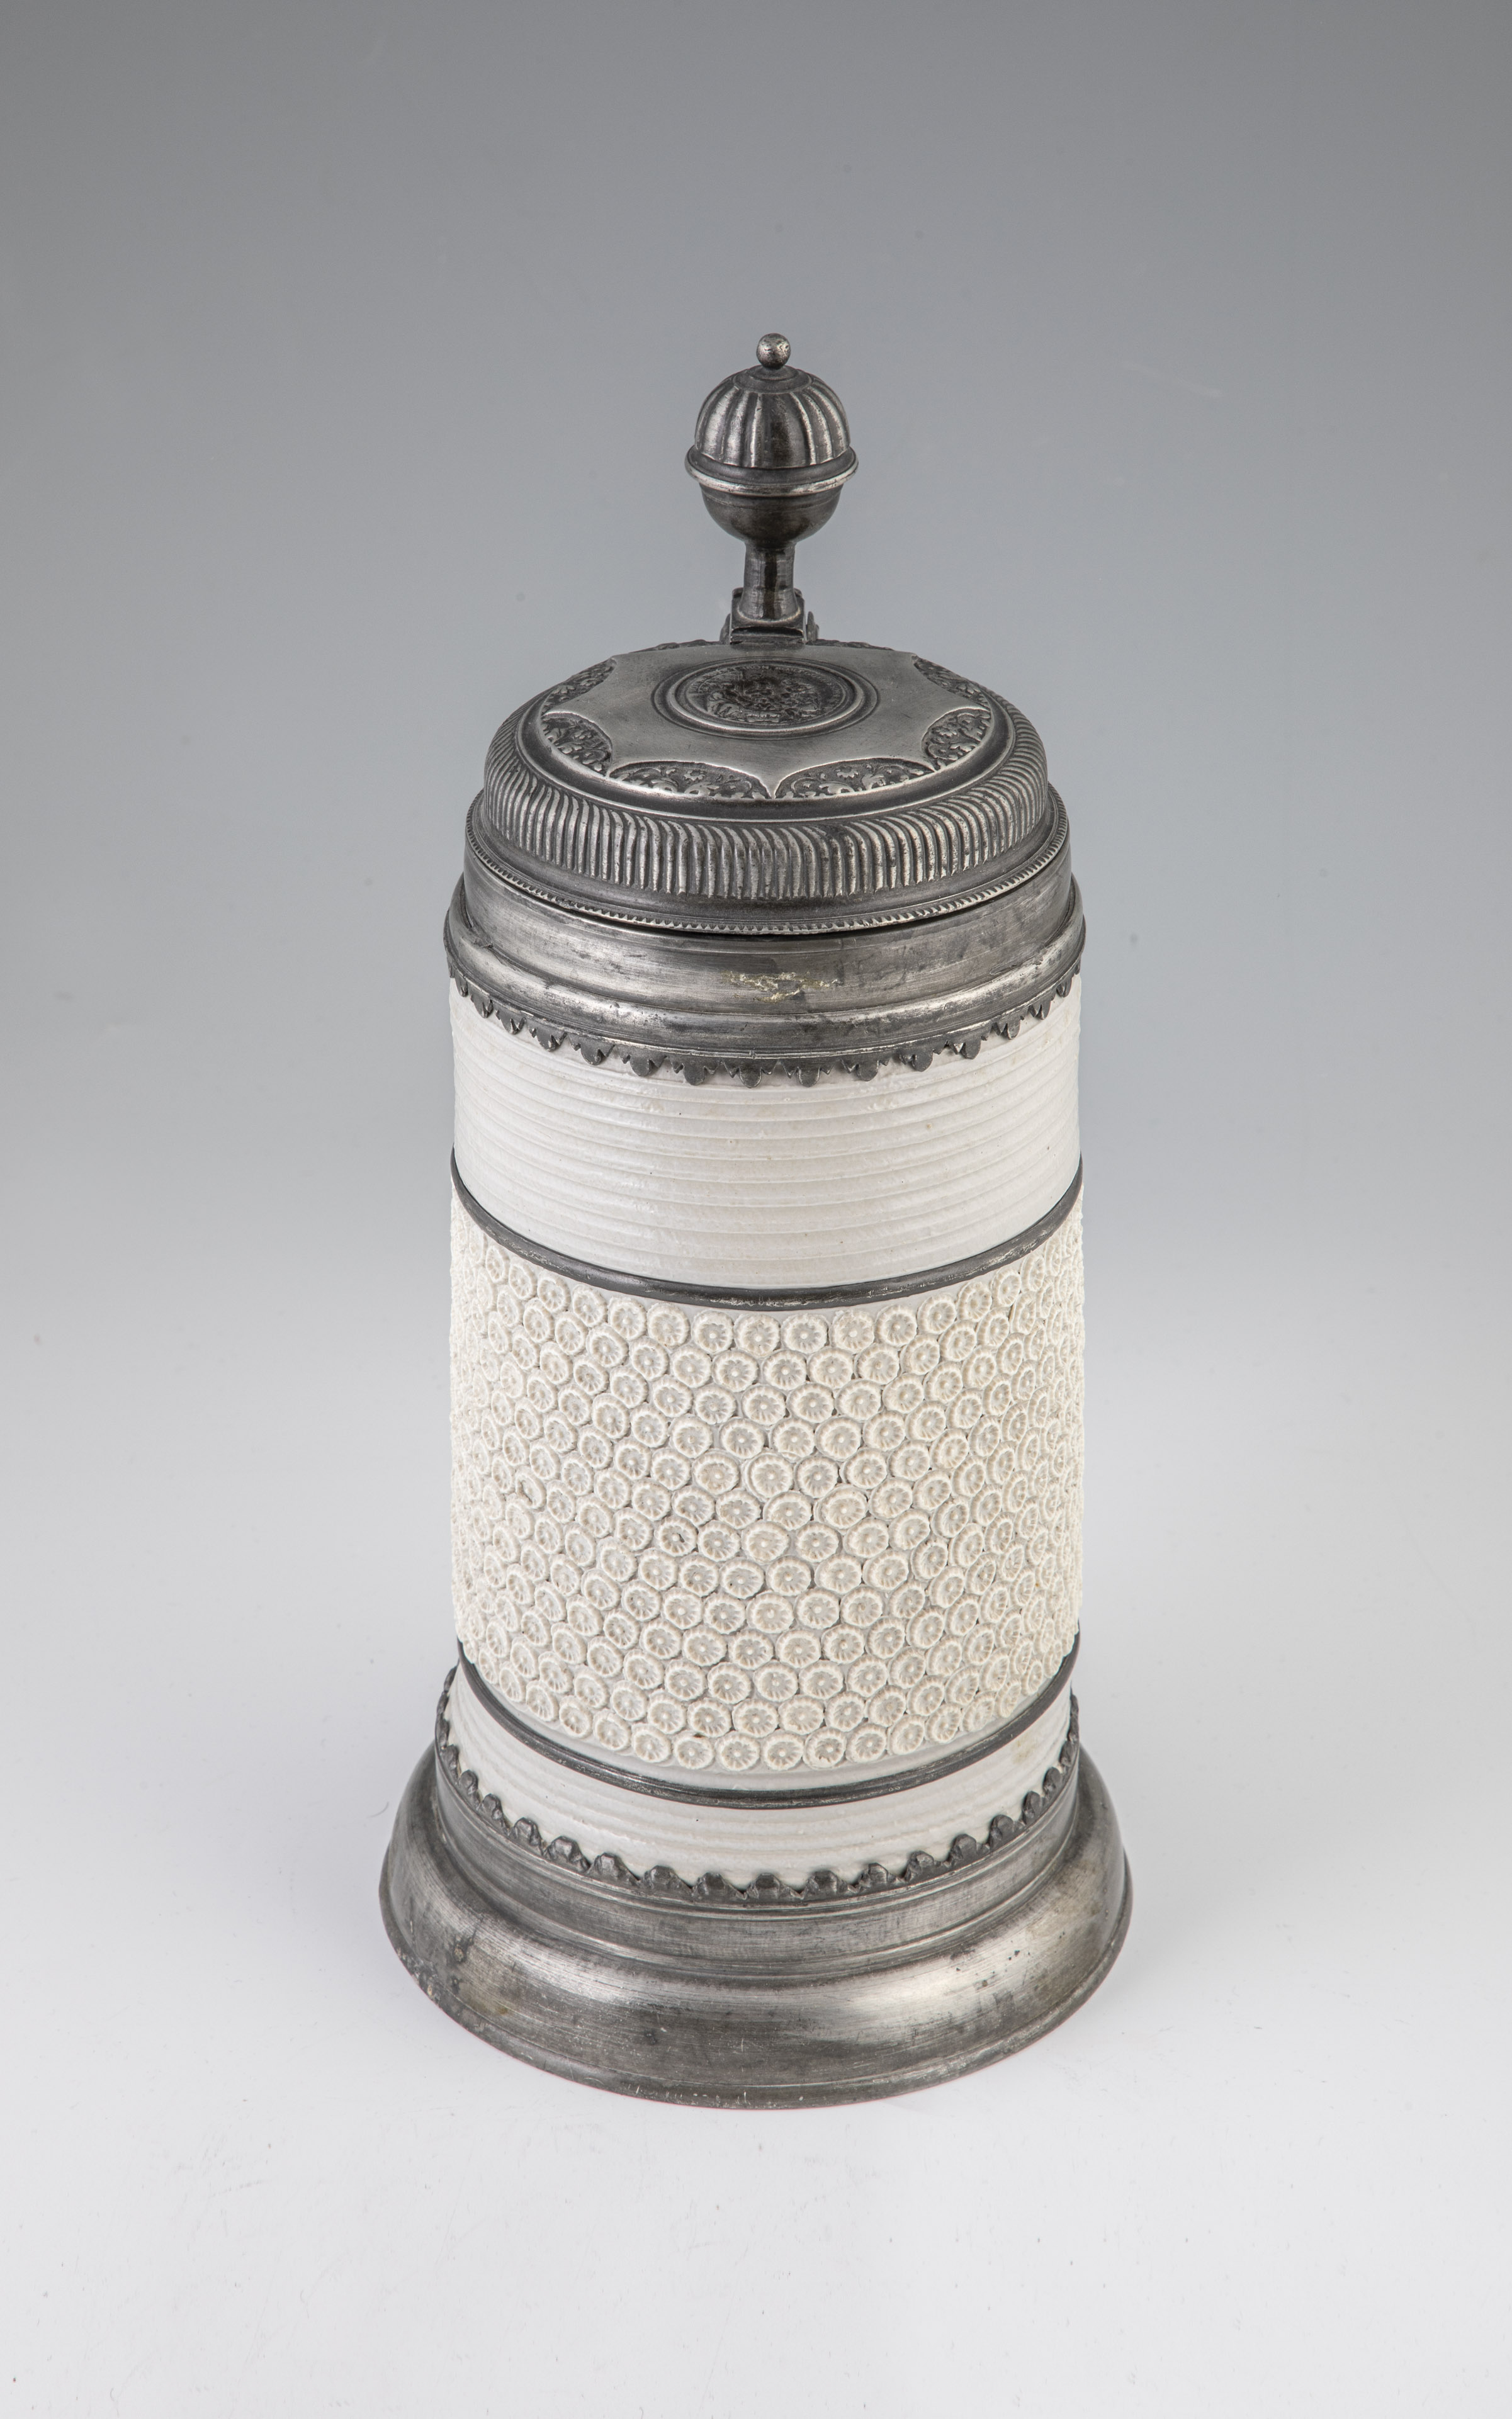 Roller pitcher with pewter mount - Image 2 of 4